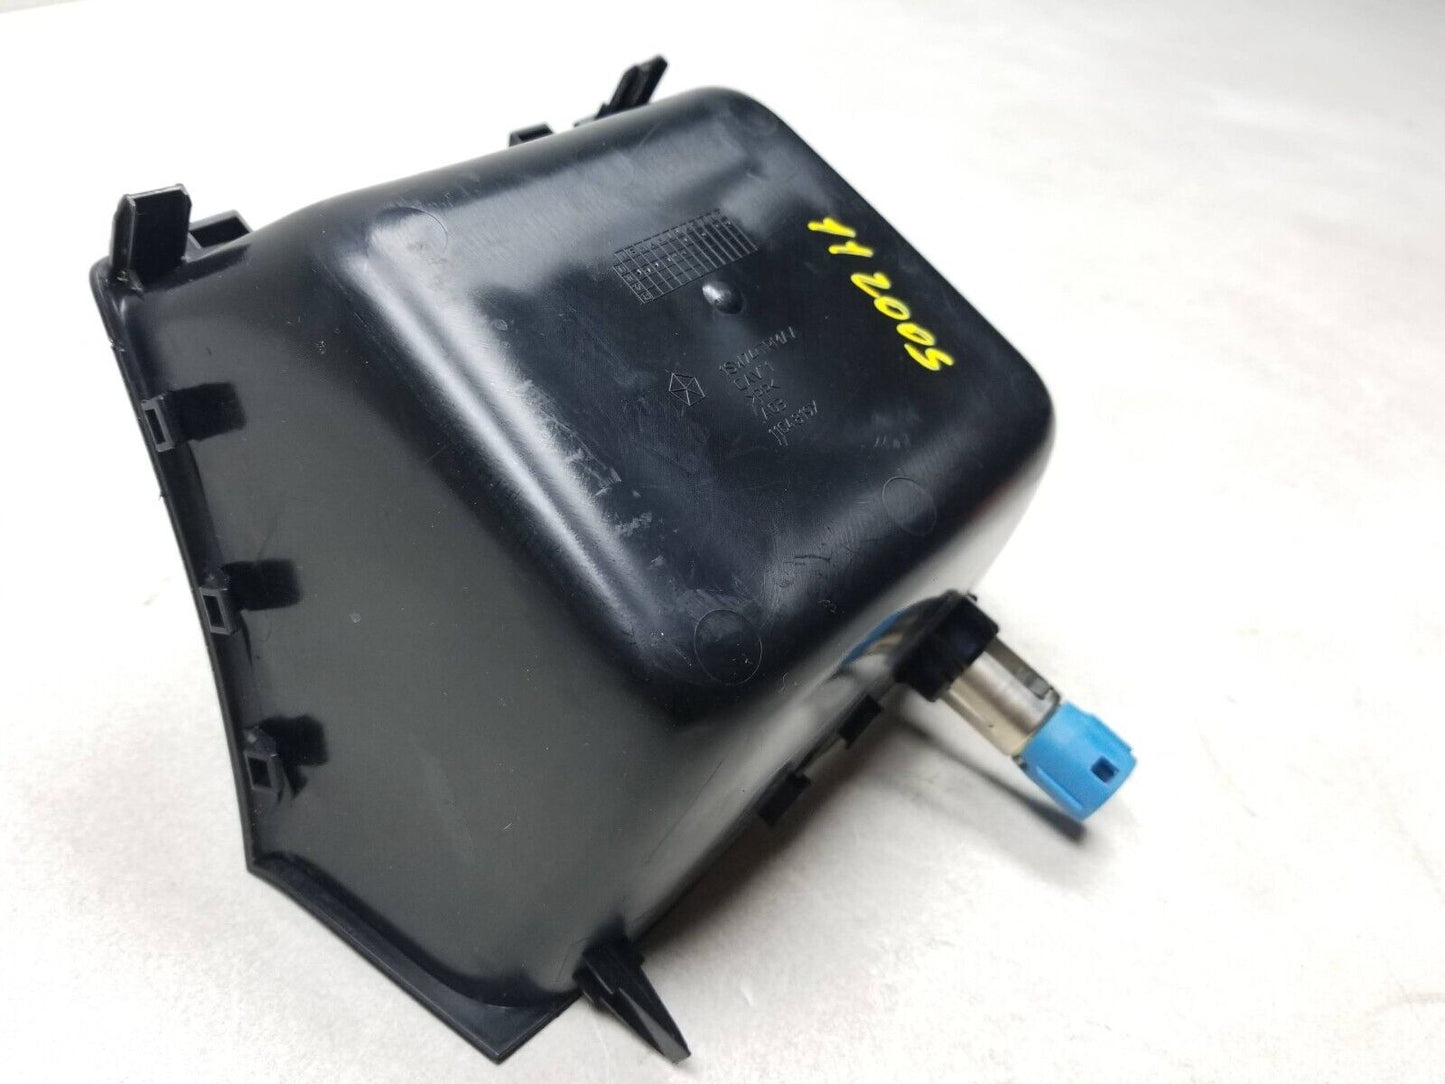 2011-2014 Chrysler 200 S Console Storage Area 12v Outlet 1sw74trmaa OEM